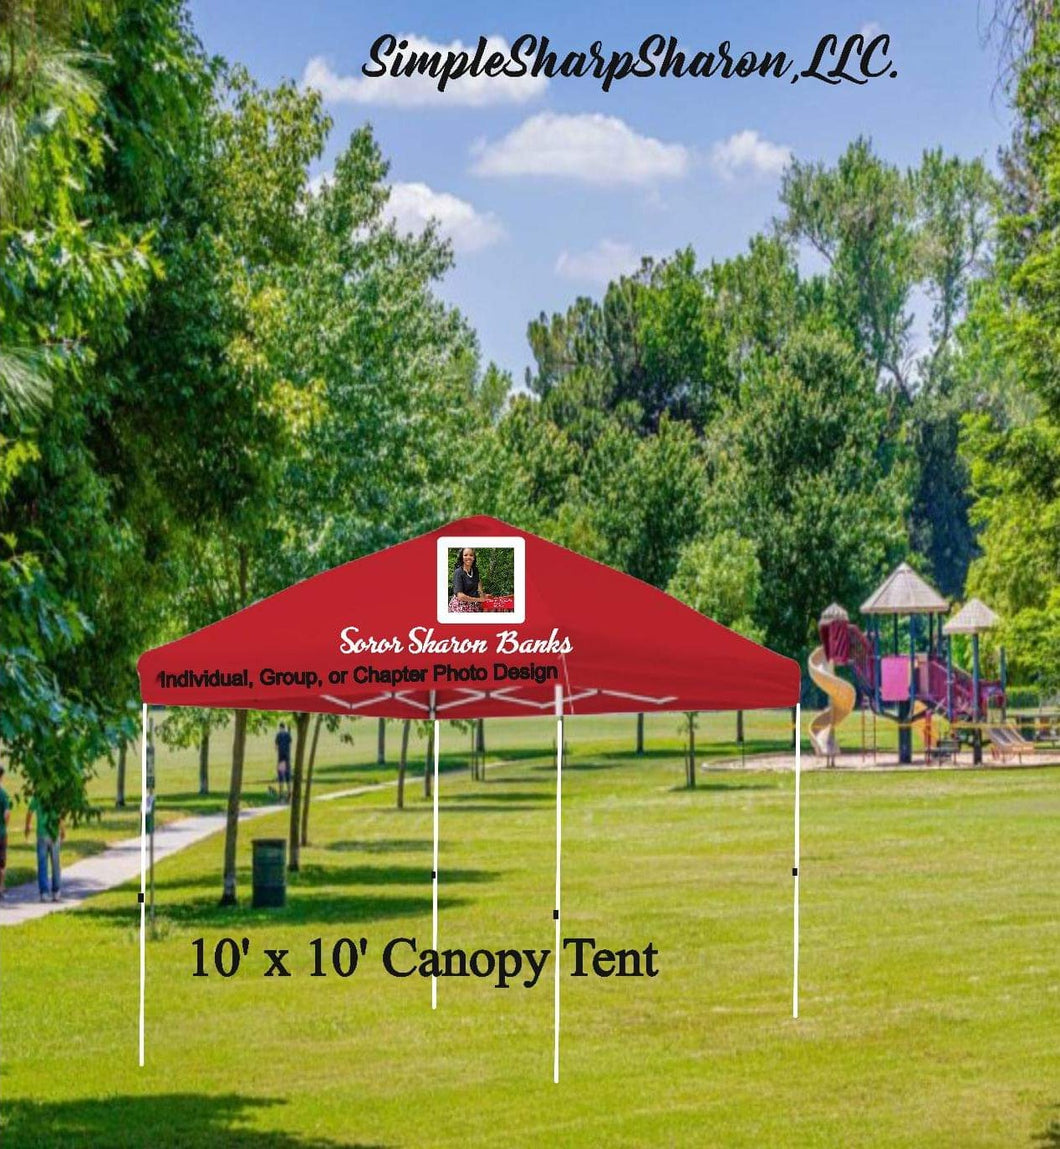 DST Canopy Tent with Individual, Group or Chapter Photo Design